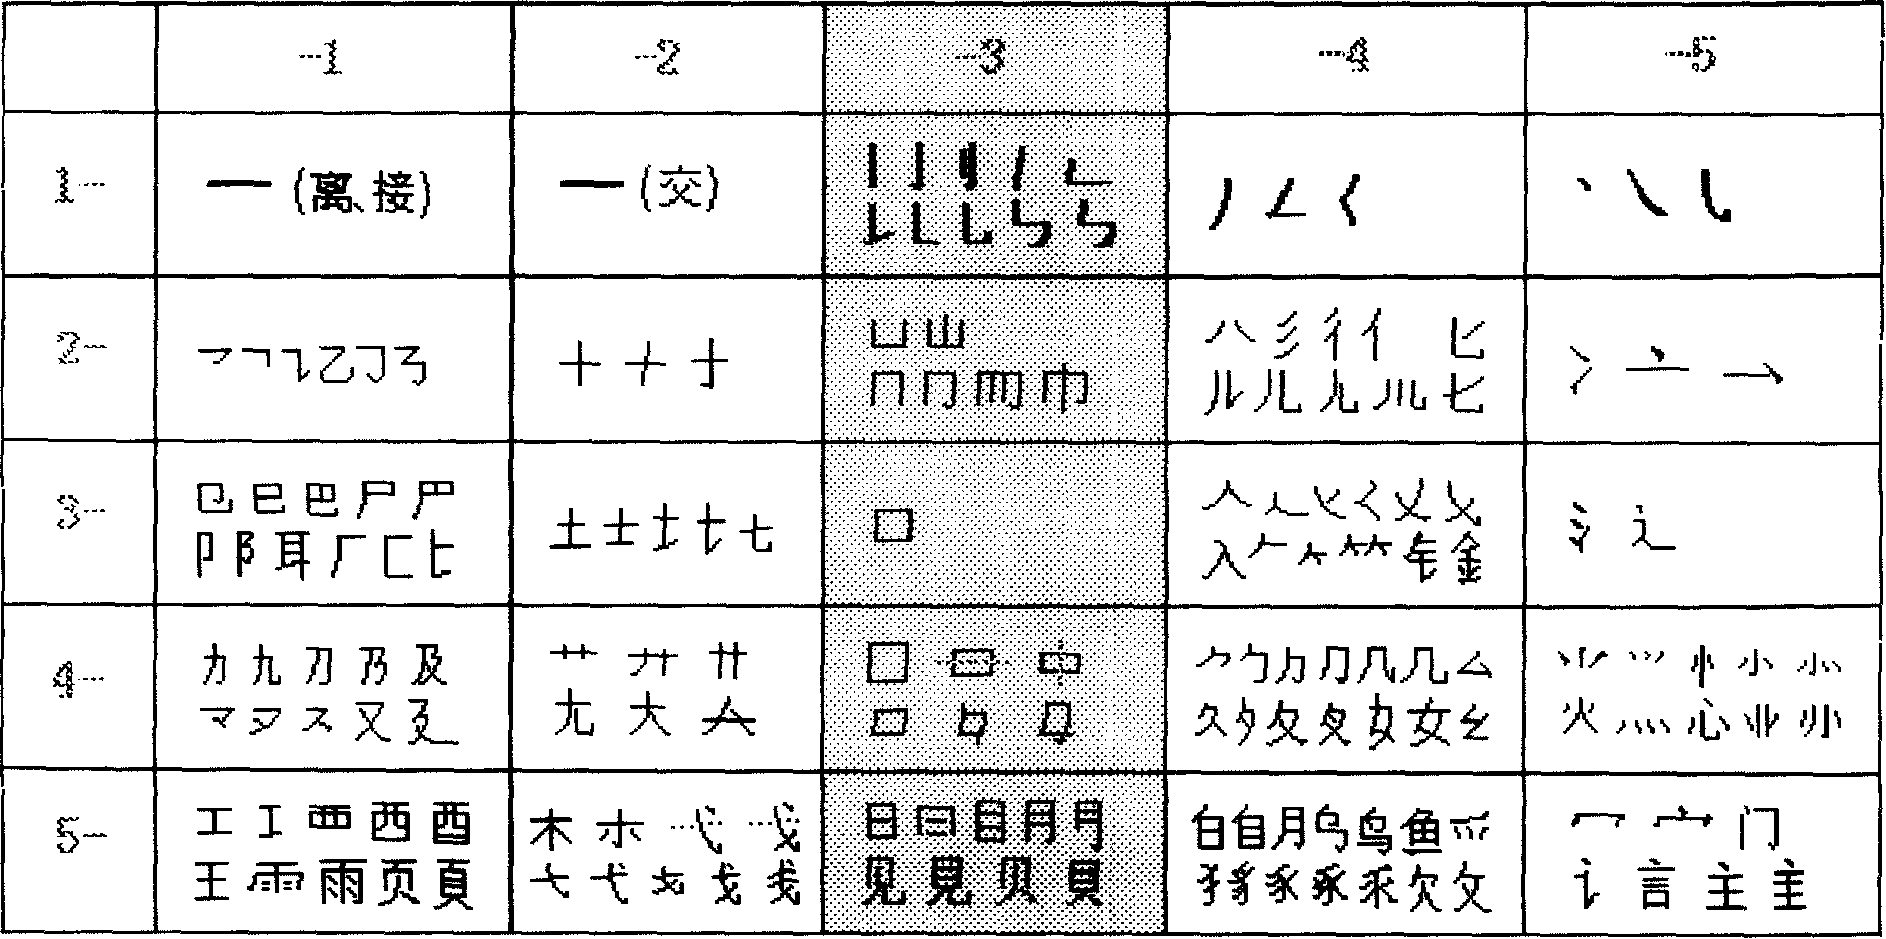 Second coding method for Chinese character and number input method